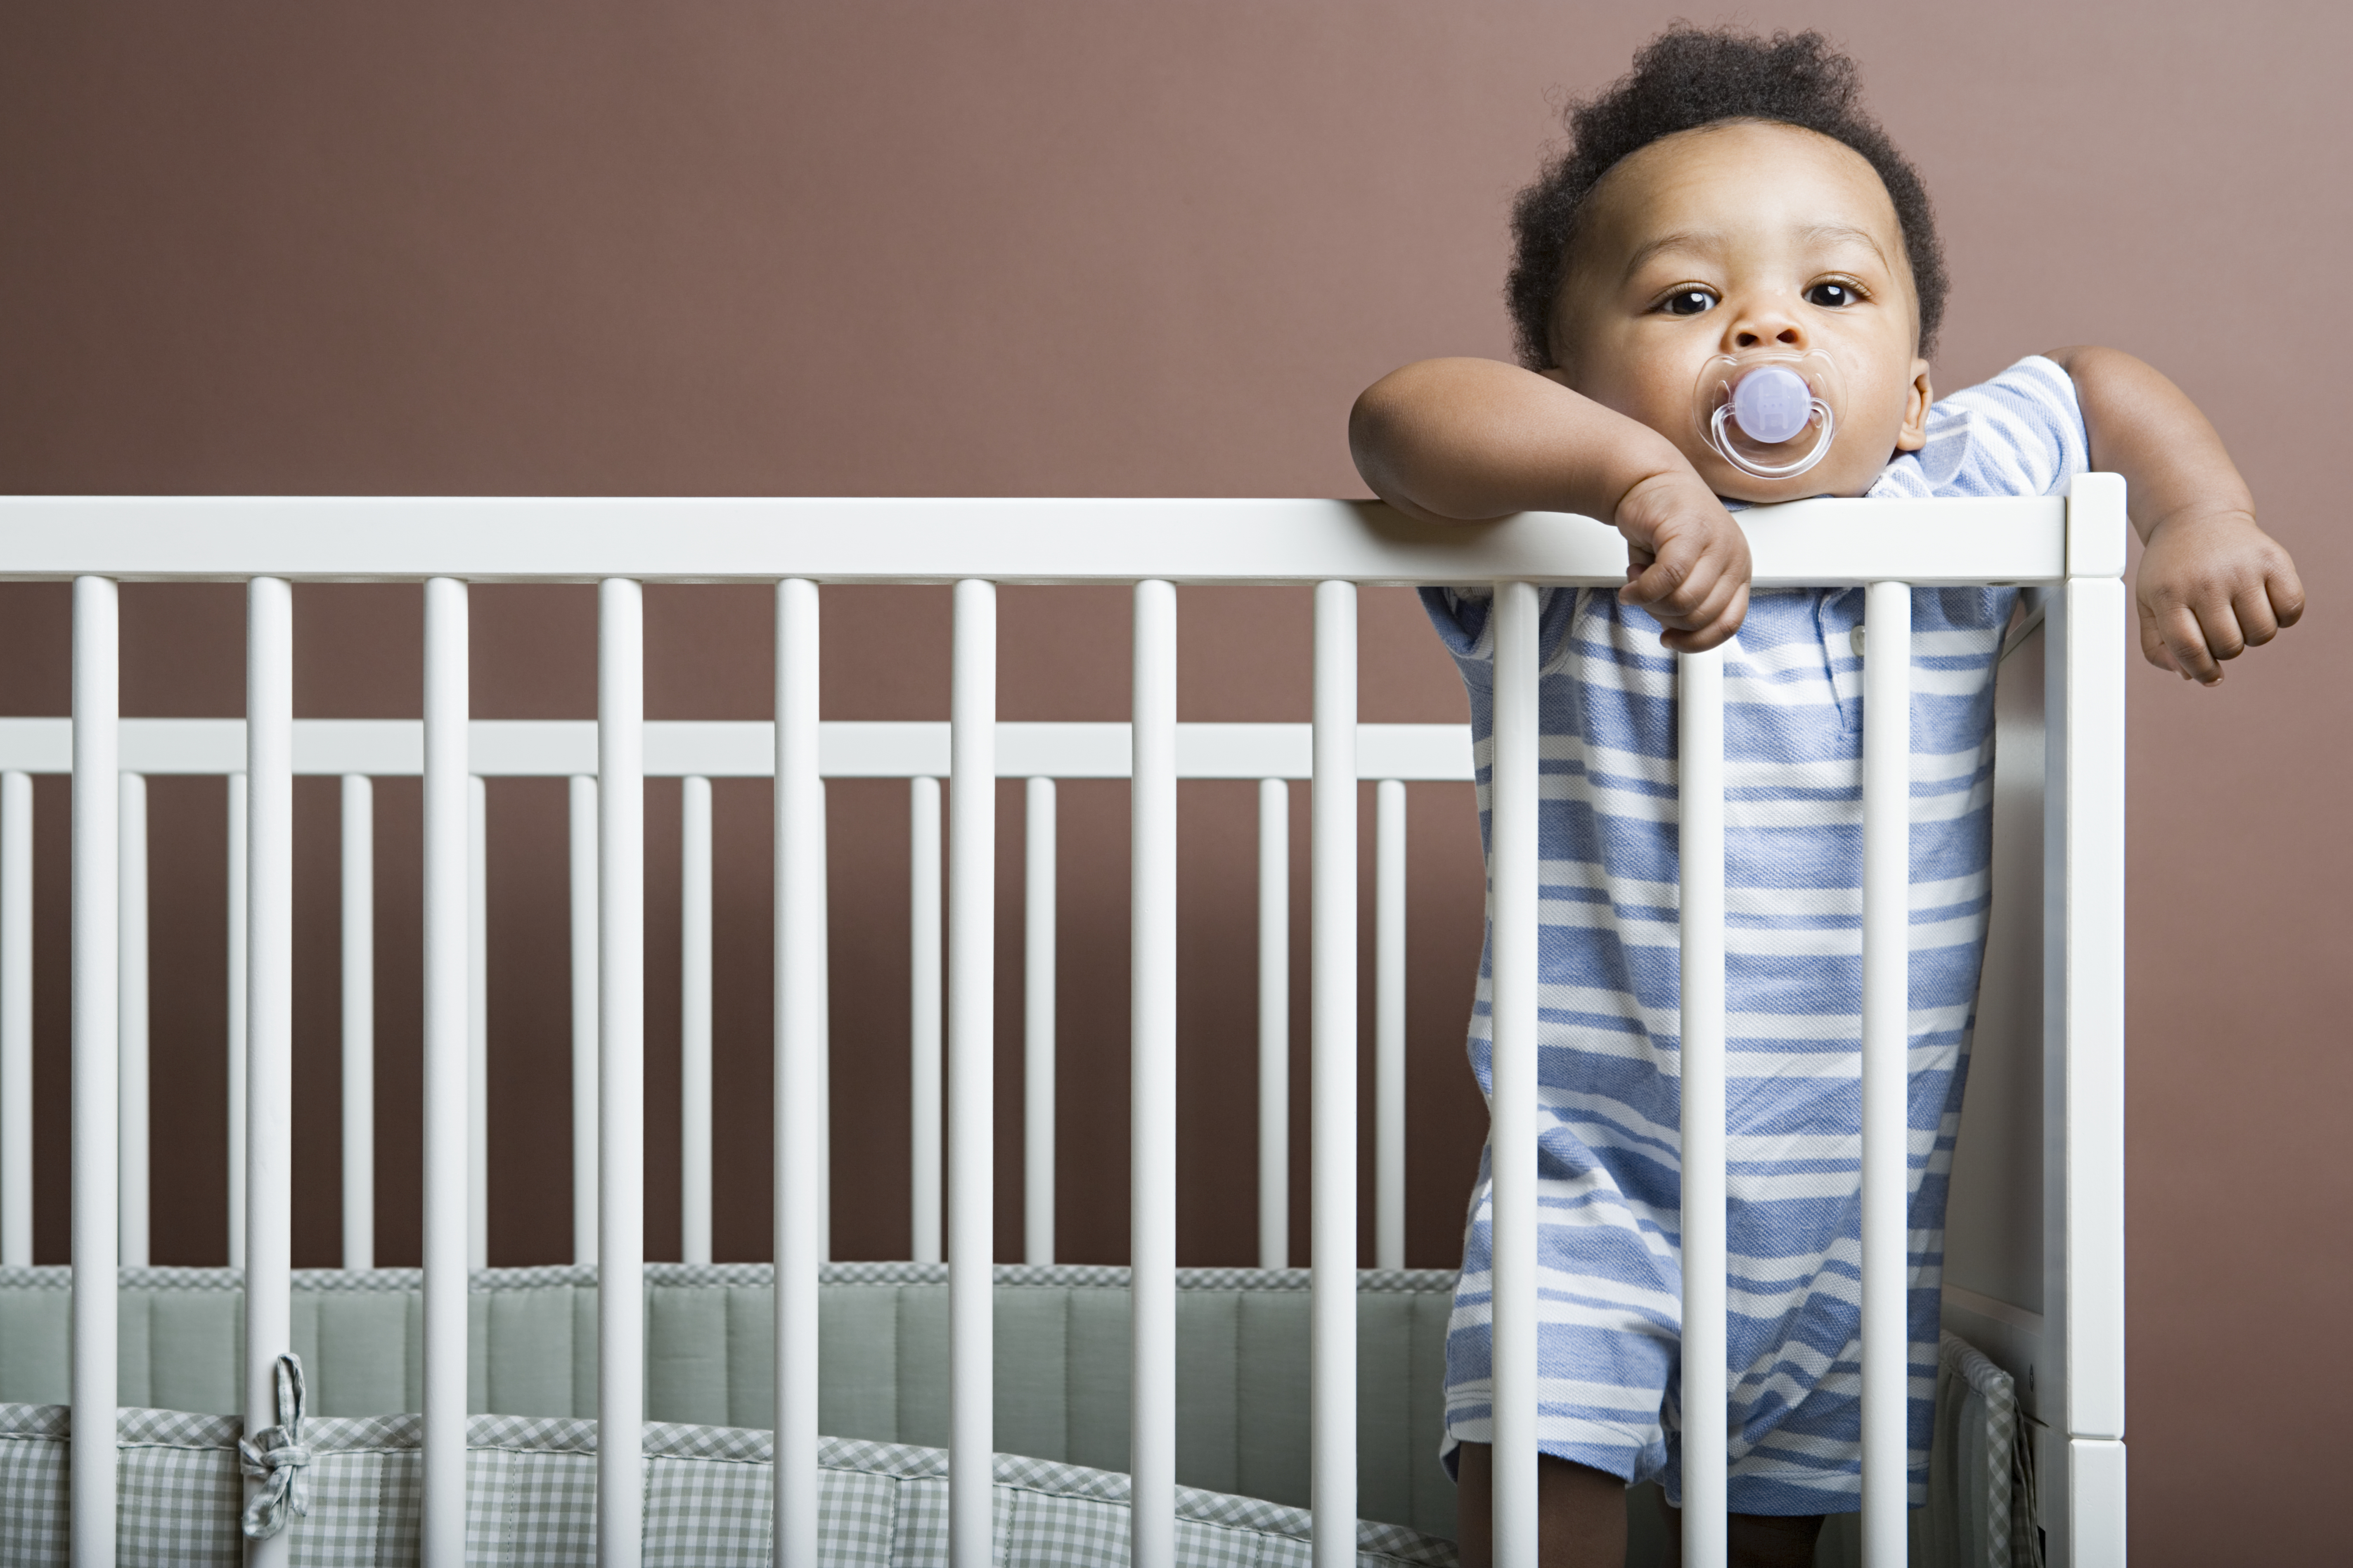 A baby standing in his crib | Source: Getty Images